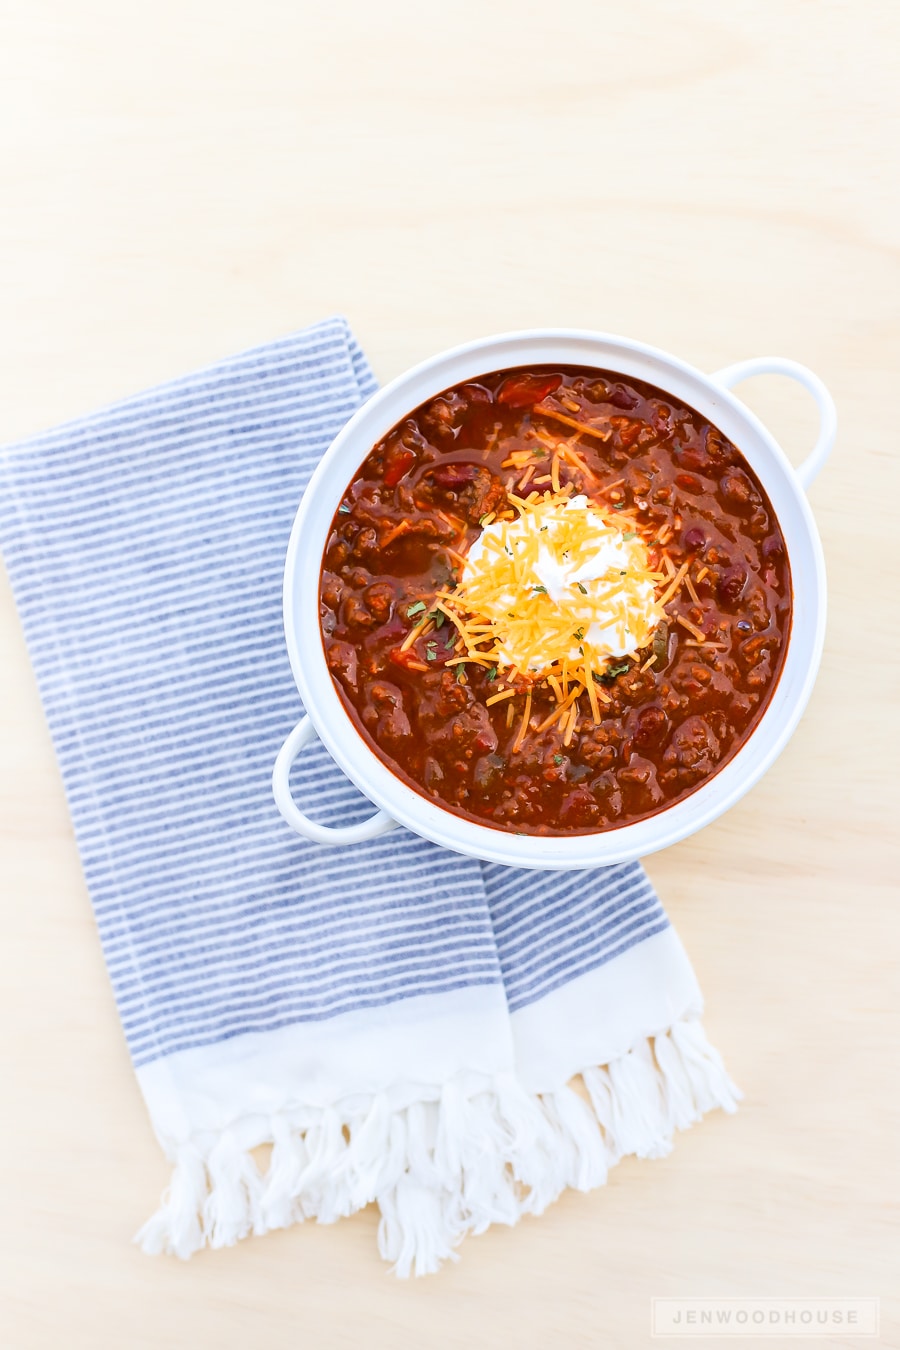 Award-winning Sweet and Spicy Chili - the BEST chili recipe you'll ever taste!